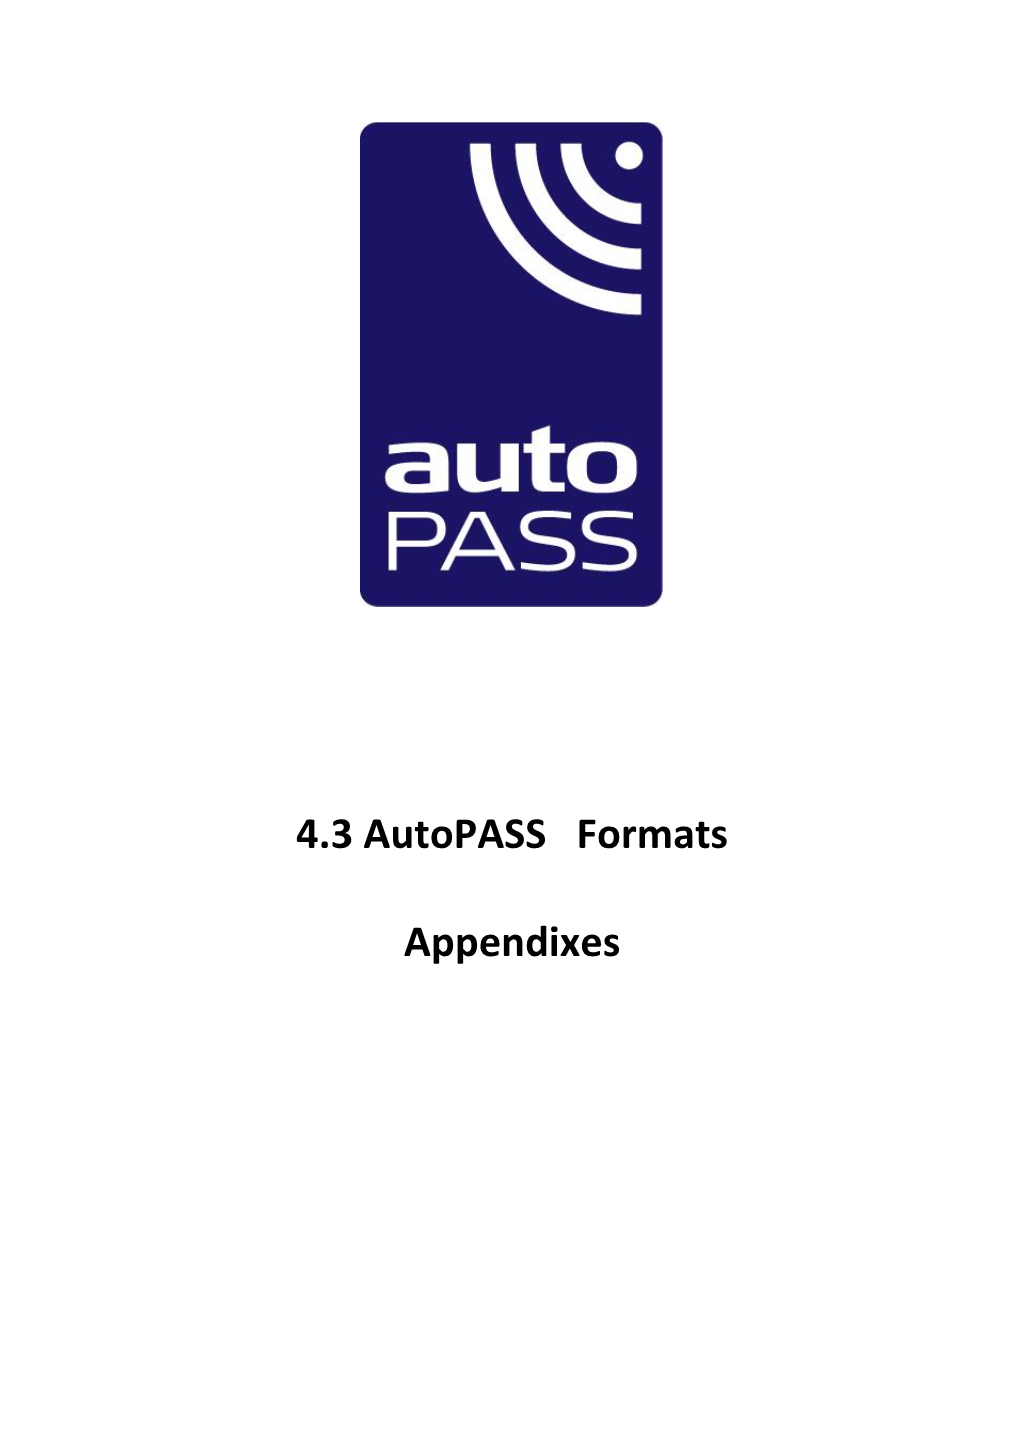 4.3 Autopass Formats Appendixes Version 1.0 Date 11Th October 2019 Page 2 of 4 1 Appendix Overview